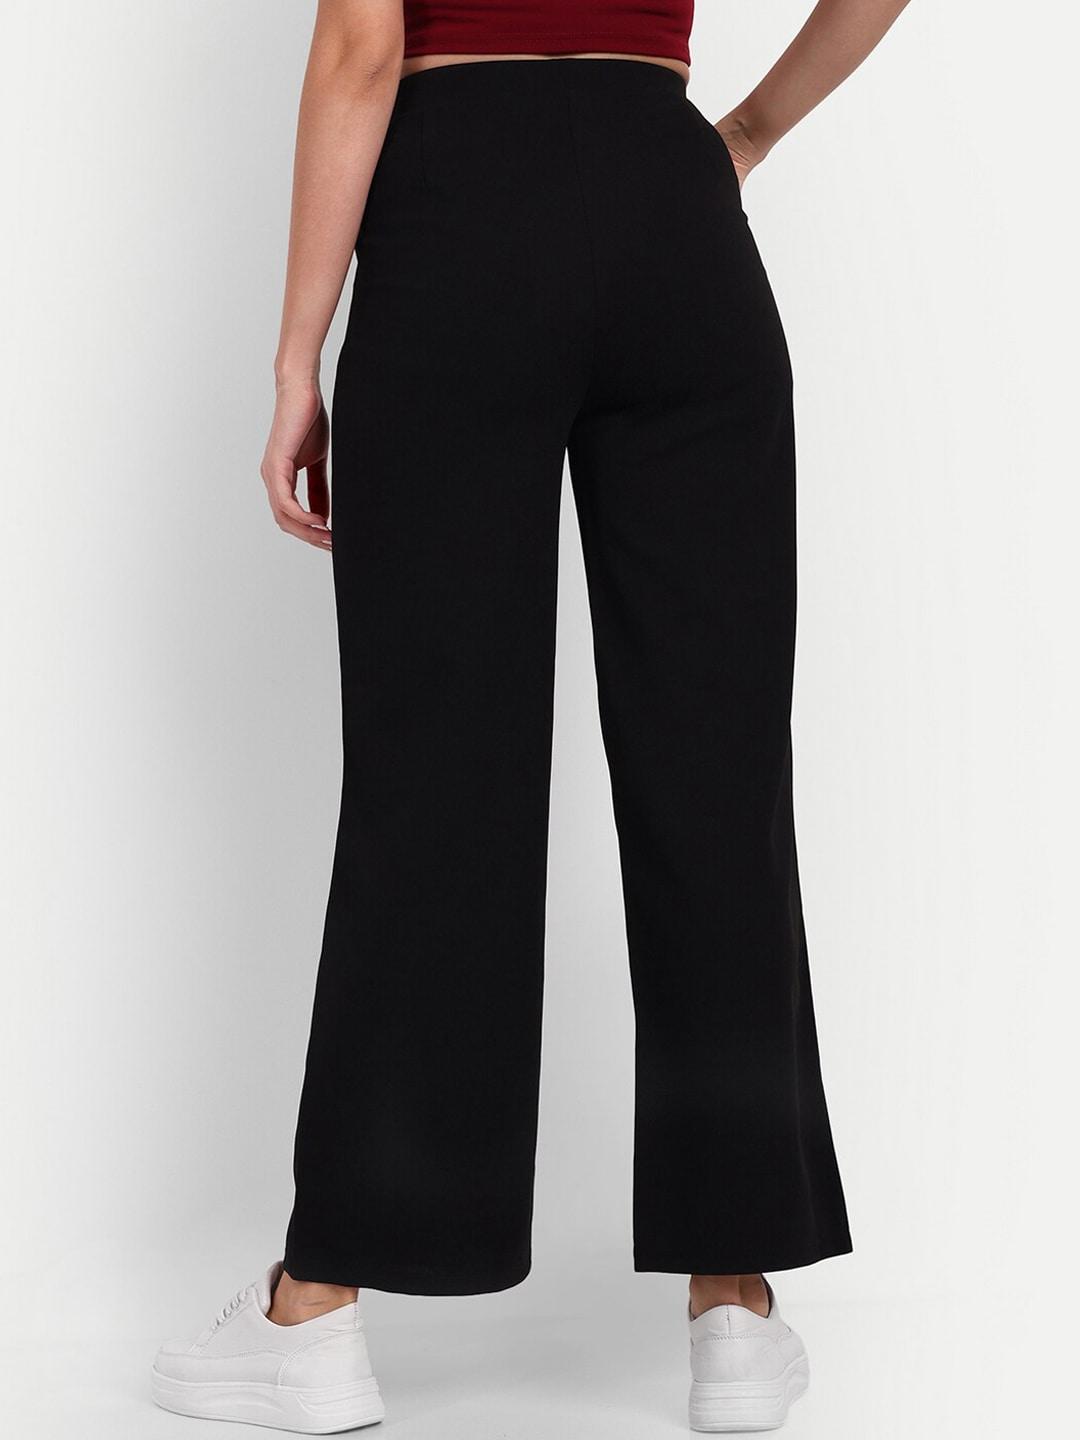 Next One Women Loose Fit High-Rise Parallel Trousers